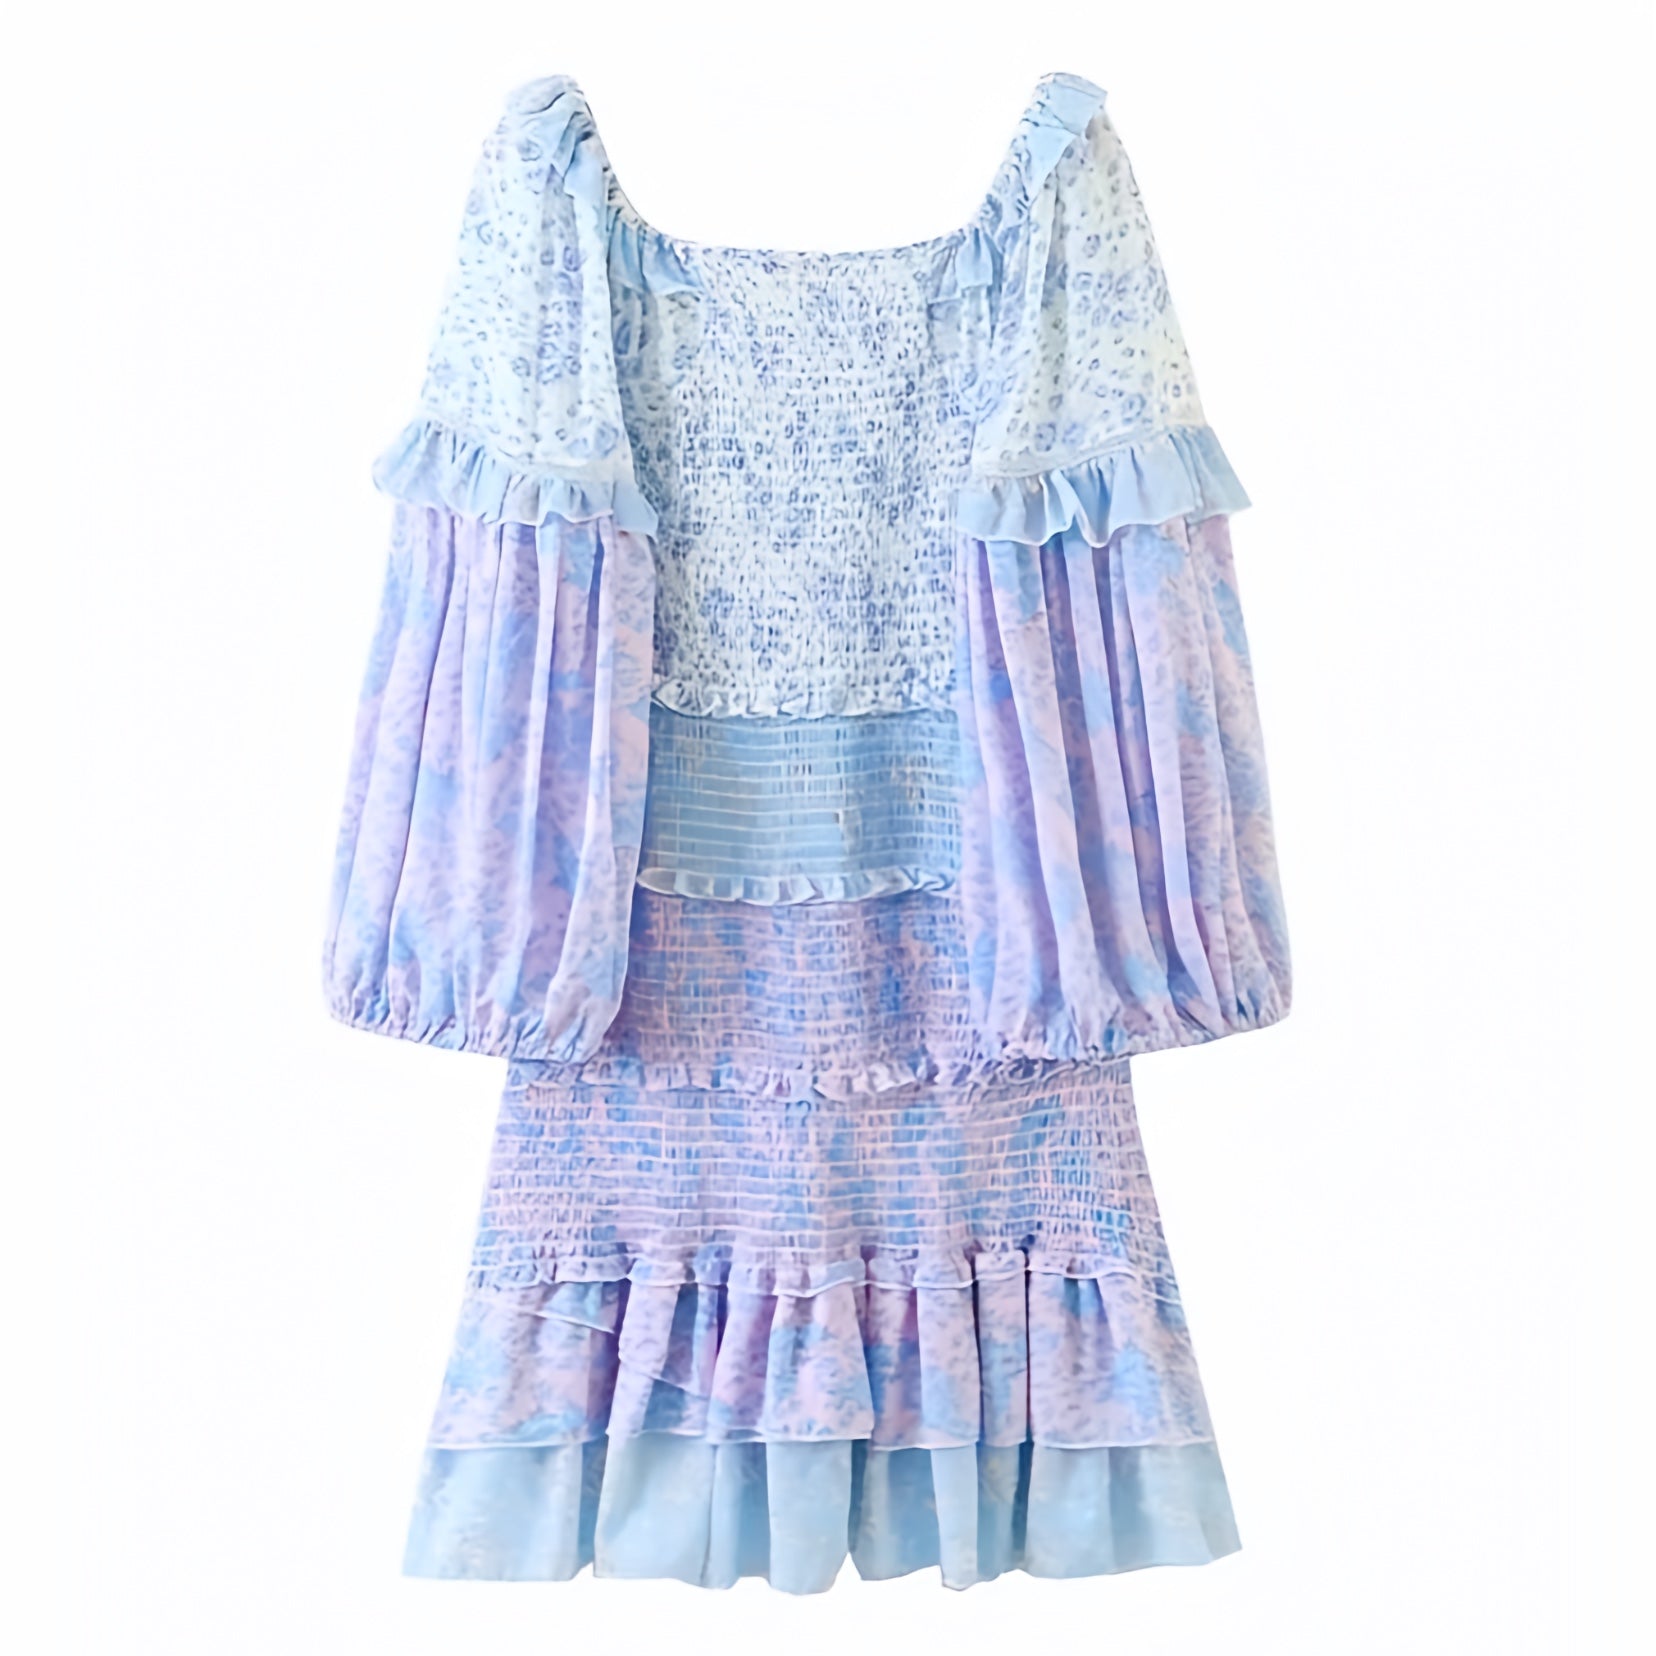 floral-print-light-blue-white-purple-multi-color-flower-patterned-layered-ruffle-trim-smocked-bodycon-slim-fit-shirred-bodice-fitted-waist-flowy-boho-tullie-tiered-long-puff-sleeve-sweetheart-neckline-short-mini-dress-gown-women-ladies-trendy-chic-spring-2024-summer-elegant-casual-semi-formal-feminine-preppy-style-prom-party-coastal-granddaughter-beach-wear-vacation-sundress-loveshackfancy-zimmerman-altard-state